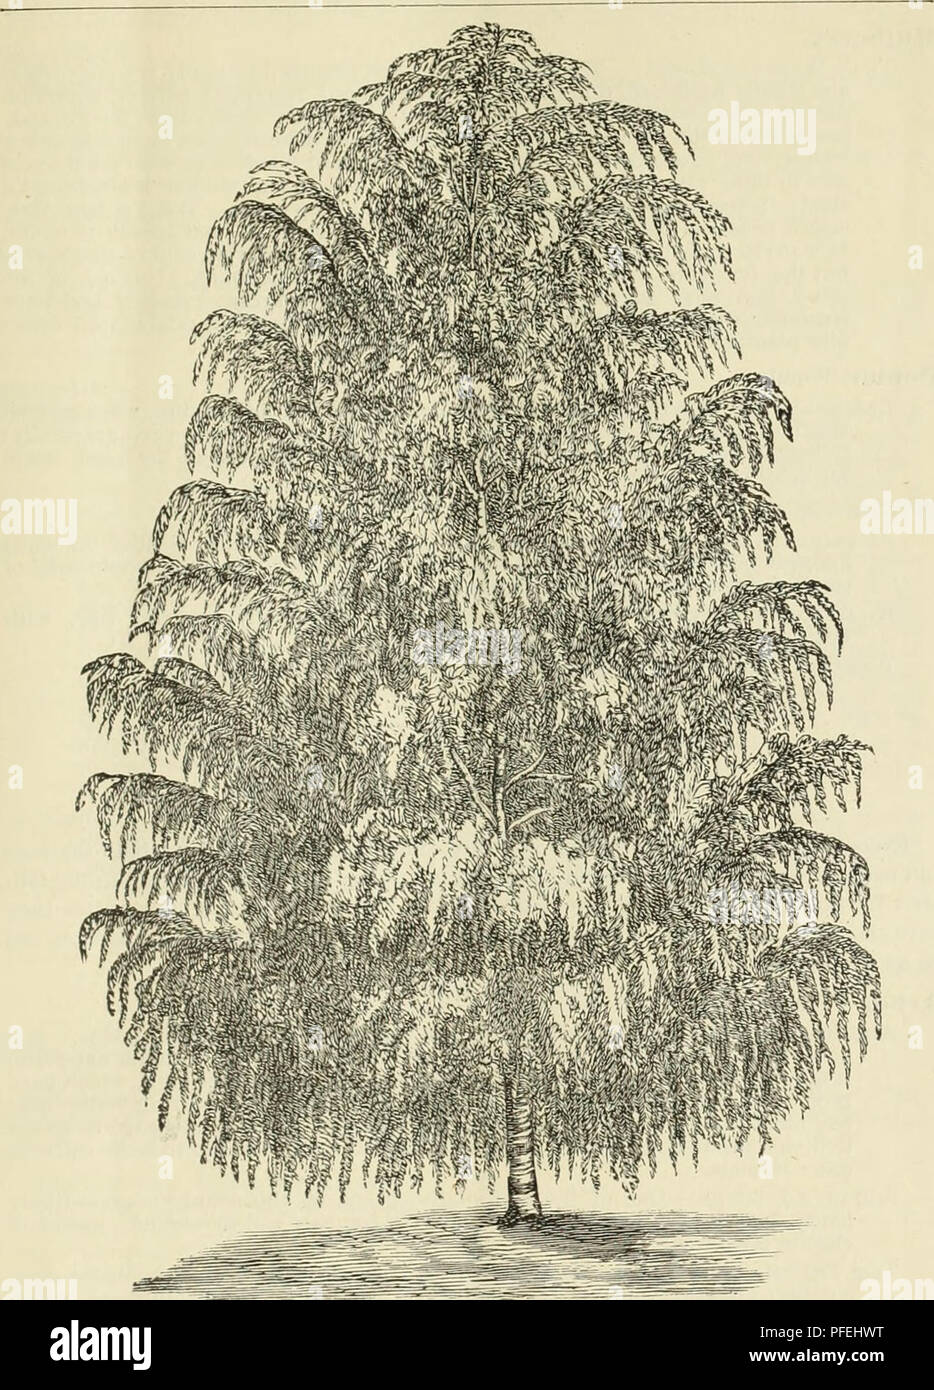 . Descriptive catalogue of fruit and ornamental trees grapes, roses, shrubs, etc., etc.. Fruit trees Catalogs; Ornamental trees Catalogs; Climbing plants Catalogs; Nursery stock Catalogs. WEEPING DECIDUOUS IREES. 49. BlliClI, CUT-LEAVED WEEPING. liinclen or Lime Tree (Tilia). White-Leaved Weeping (Alba Pendula)—A line tree with large leaves and droop- ing branches. Mountain Ash (Sorbus). Weeping (Aucuparia Pendula&gt;—A beautiful tree, witli stragghng, weeping branches; makes a flue tree for the lawn; suitable for covering arbors.. Please note that these images are extracted from scanned page  Stock Photo